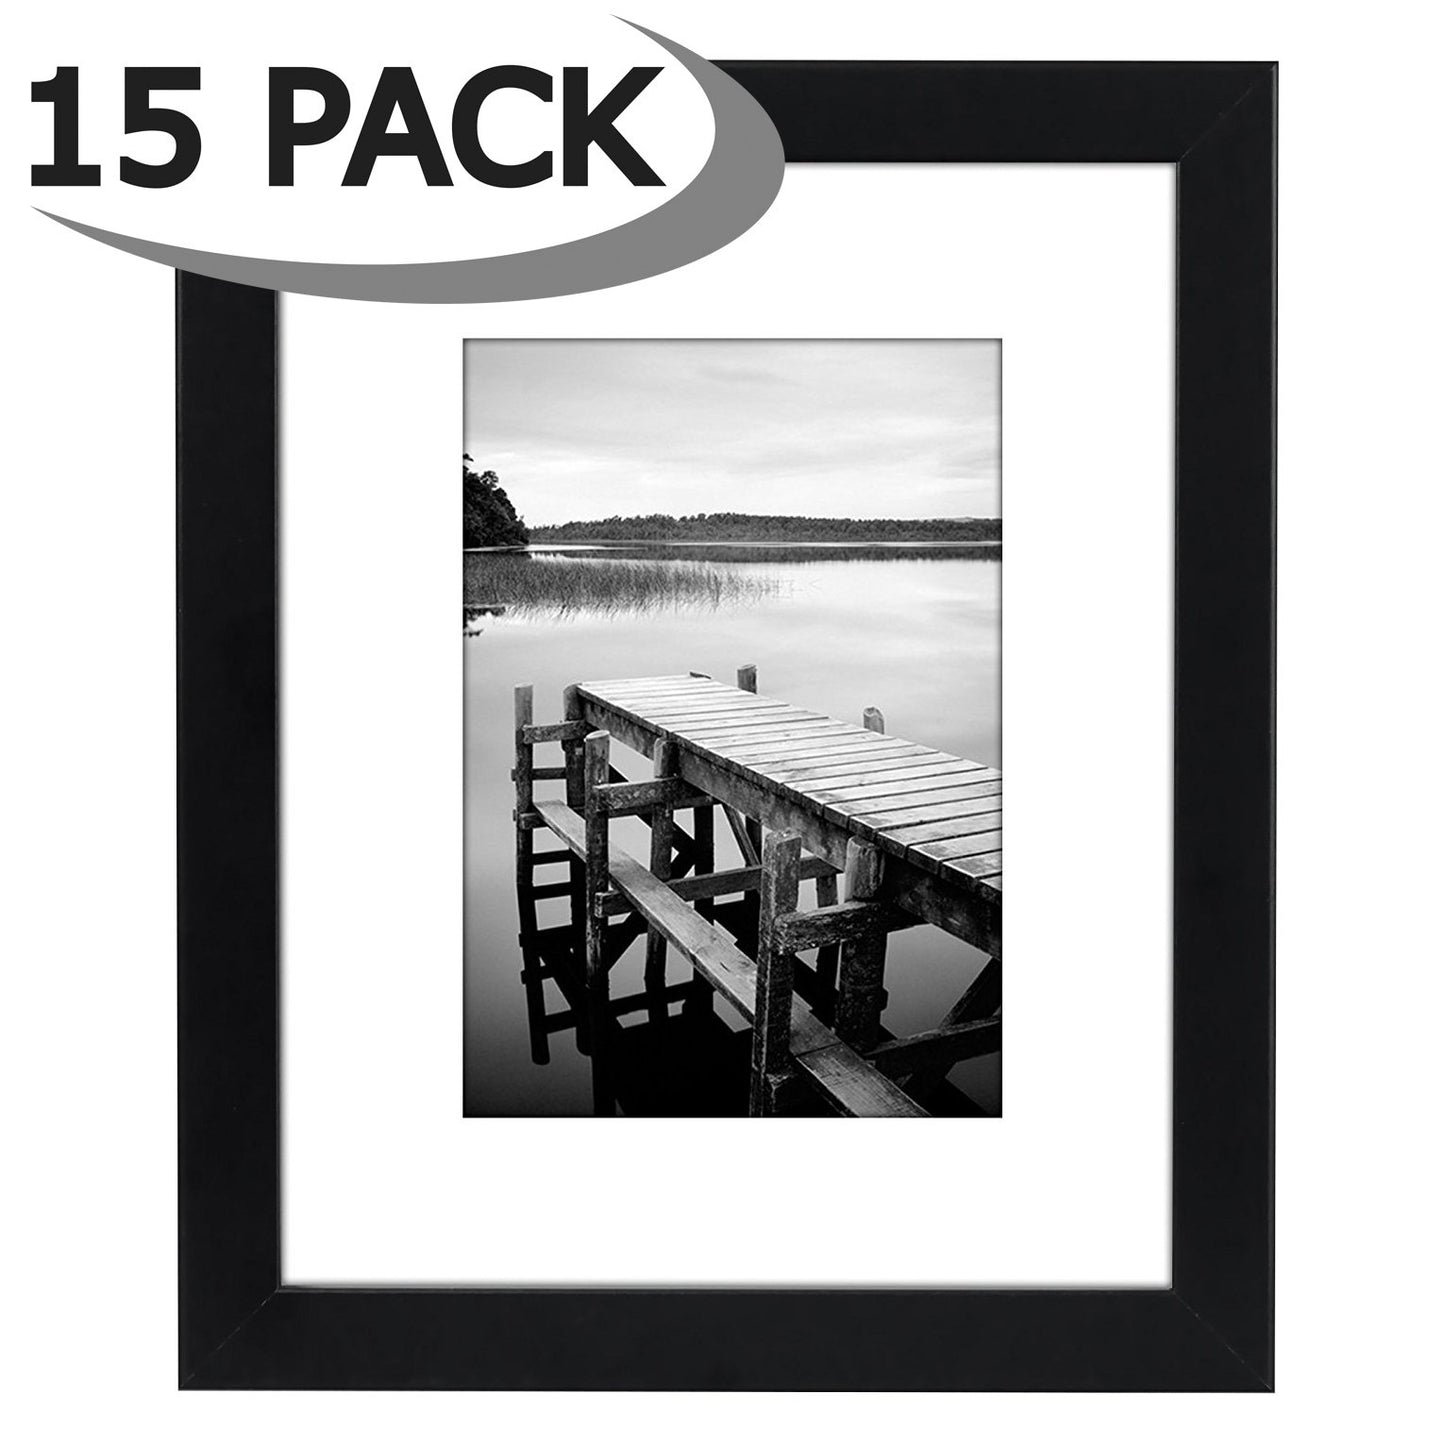 15 Pack - 8x10 Picture Frame - Made to Display Pictures 5x7 Inches with Mat or 8x10 Inches Without Mat - Picture Frame - Americanflat